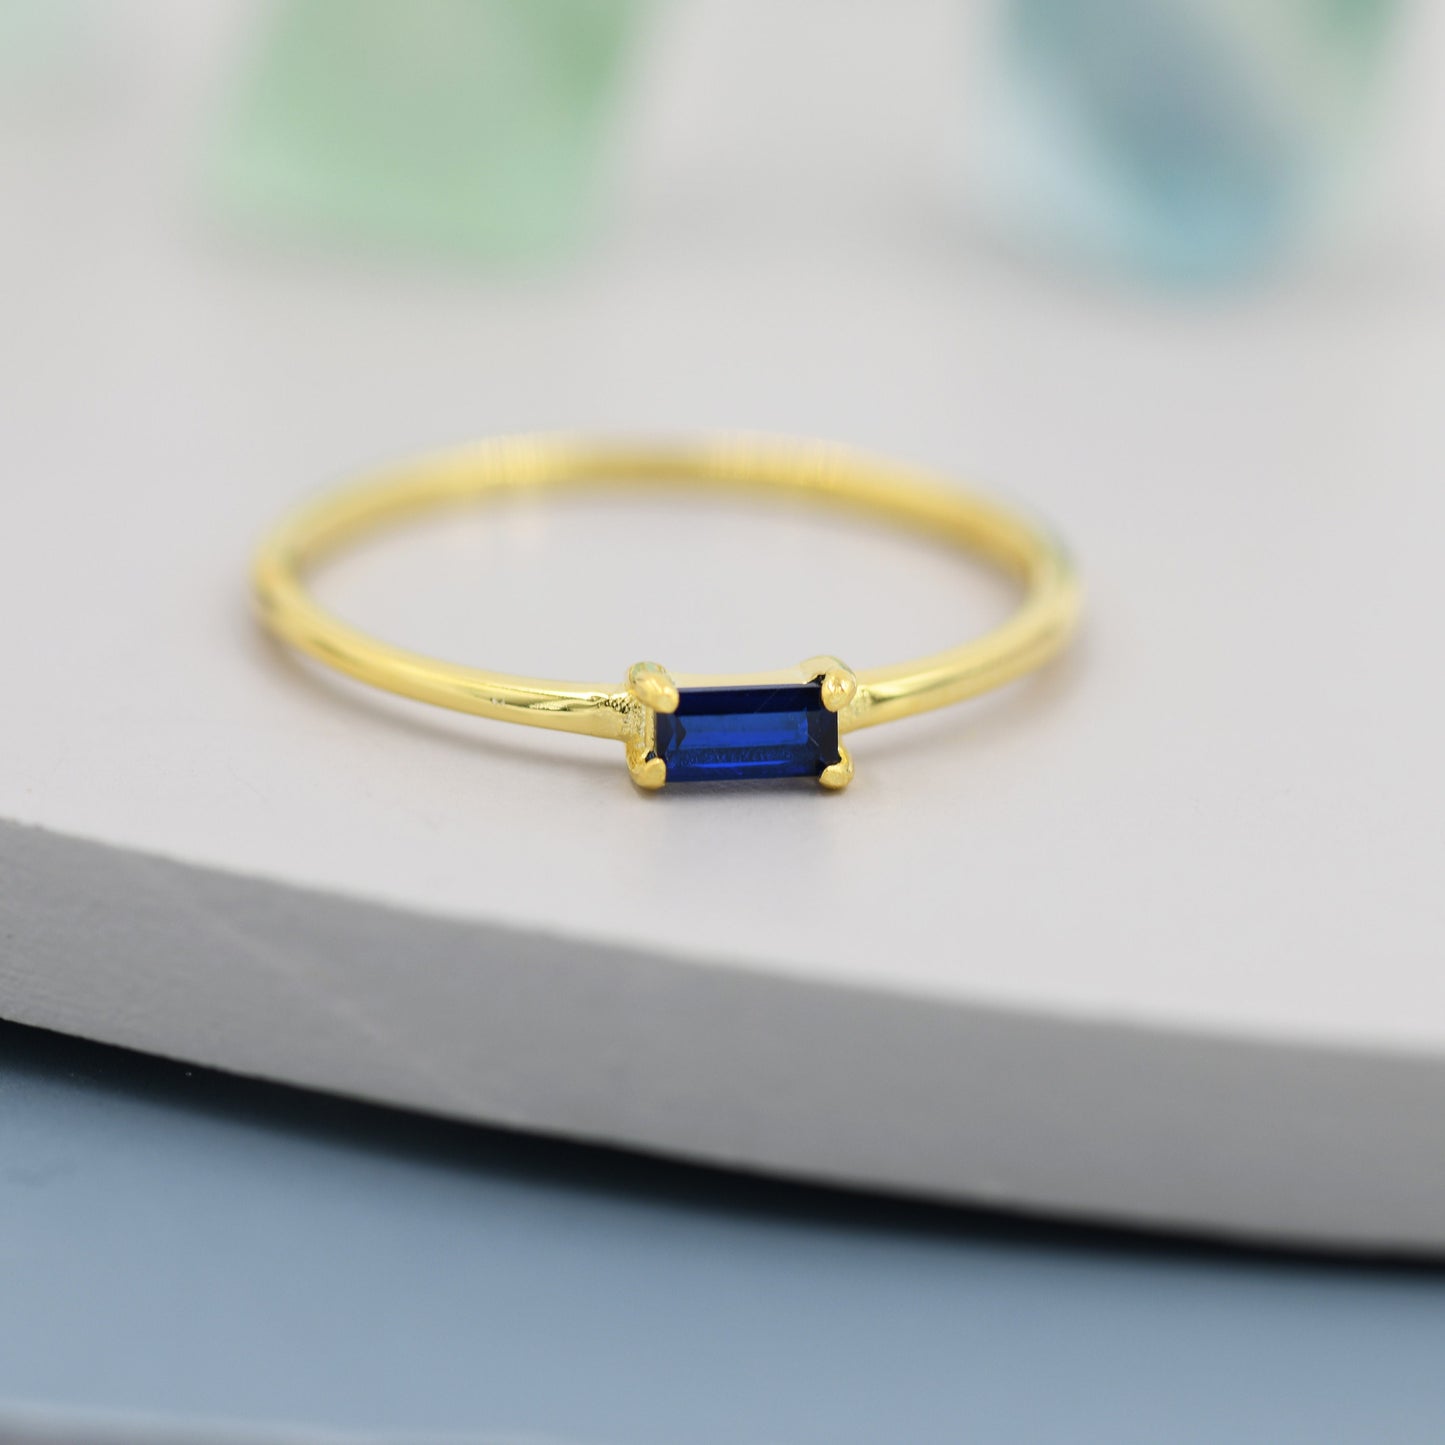 Sapphire Blue Baguette CZ Ring in Sterling Silver, Silver or Gold, Minimalist Single Baguette CZ Ring US 5 - 8